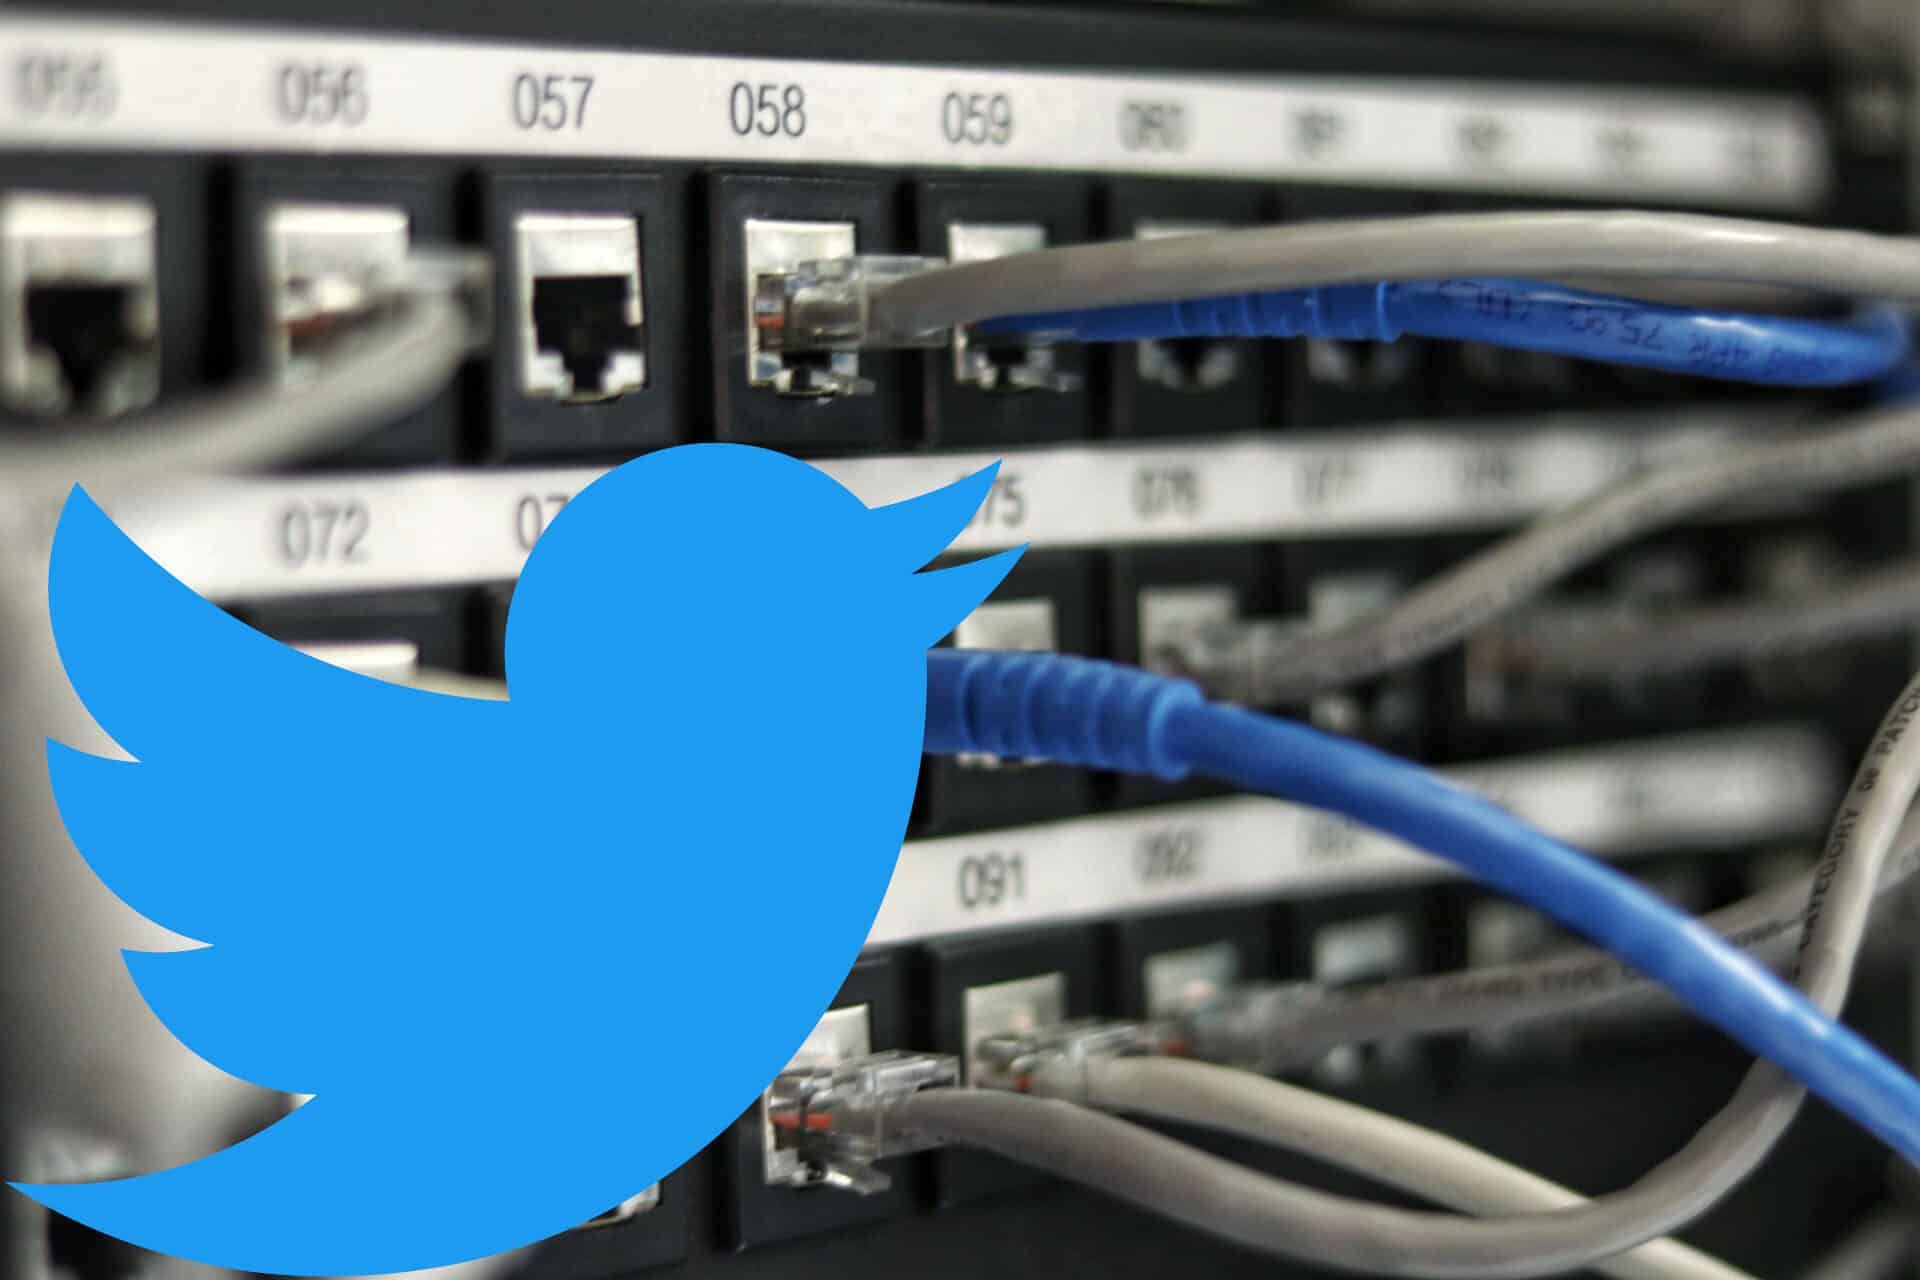 a patch panel with the Twitter logo over it.